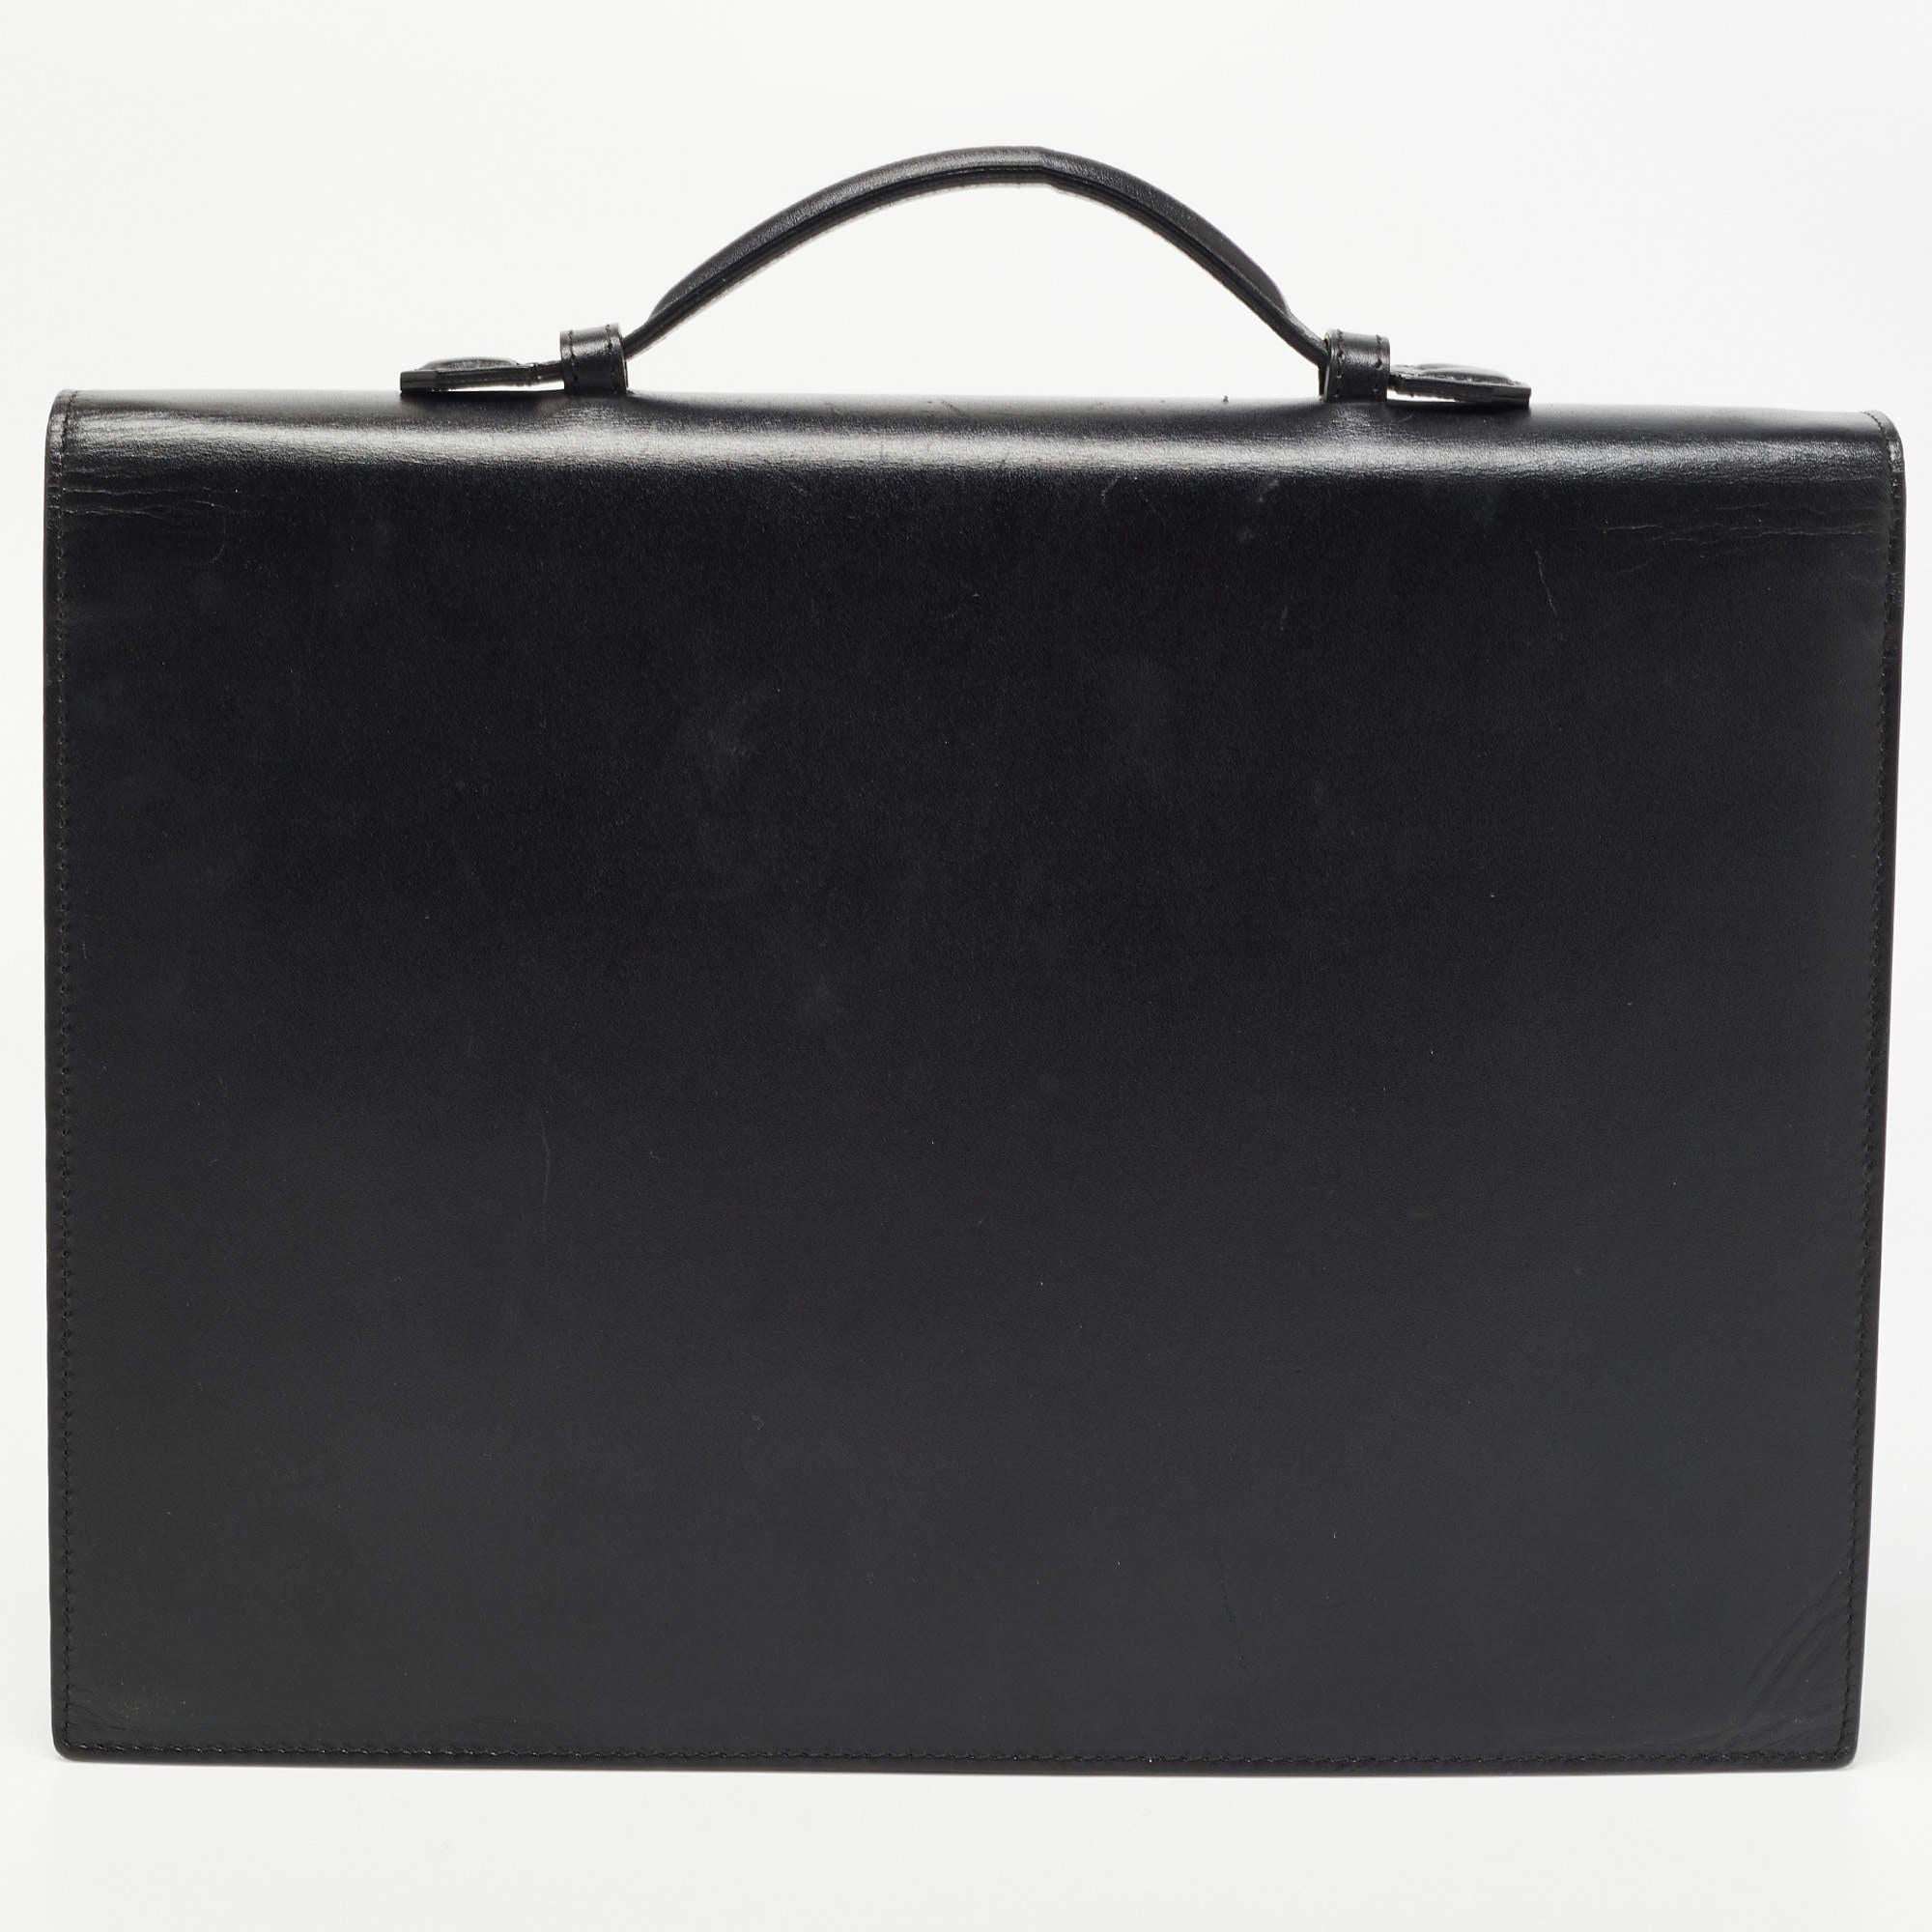 Say hello to this luxurious briefcase that has been crafted from fine materials. Equipped with sturdy handles, this piece is perfectly made to carry your essentials while you set out.

Includes: Original Dustbag, Info Card

